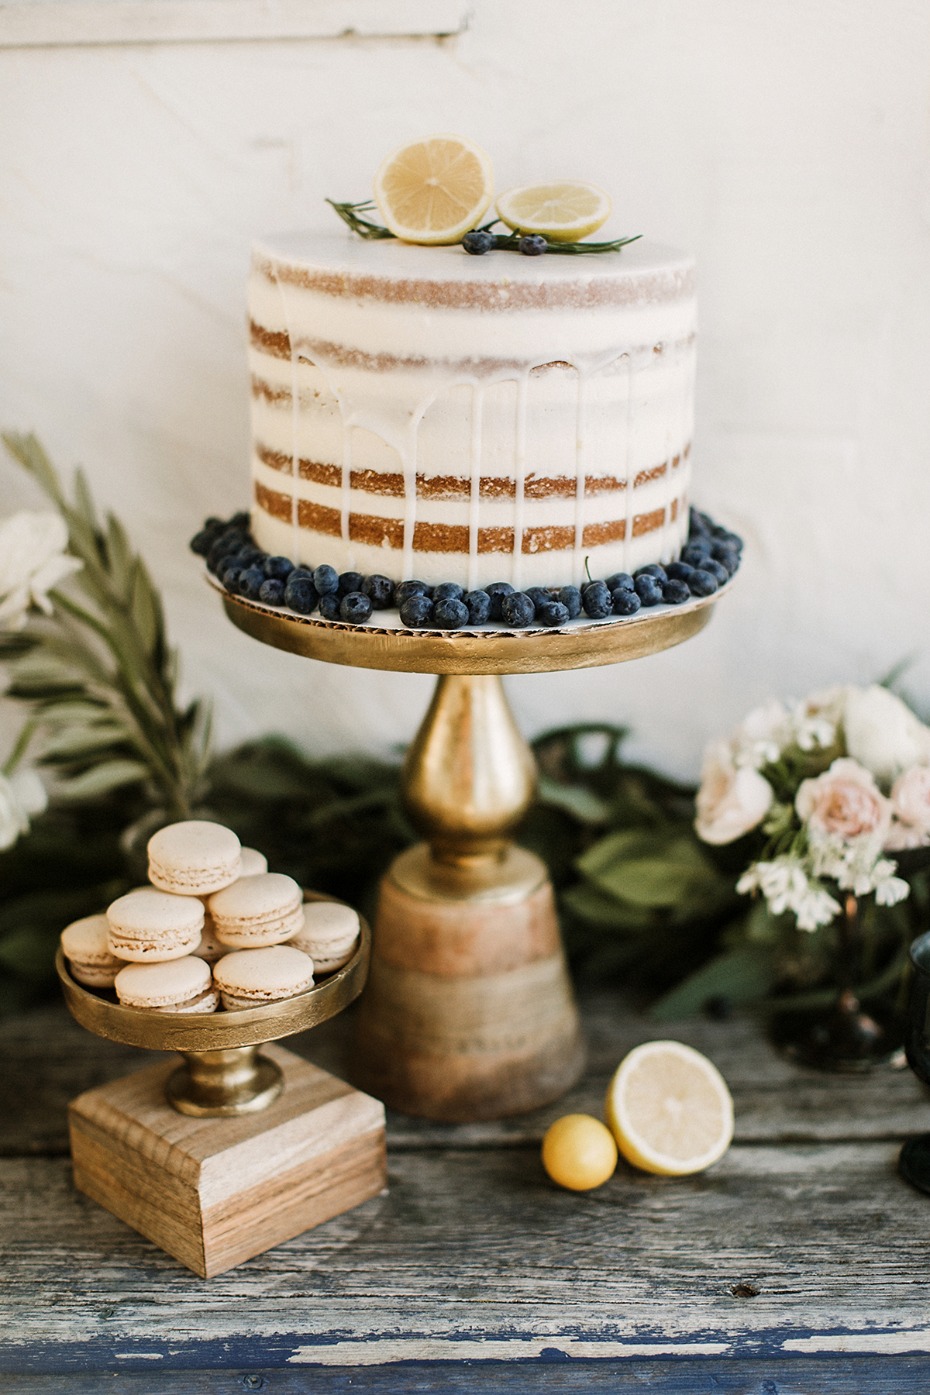 drizzle wedding cake topped with lemons